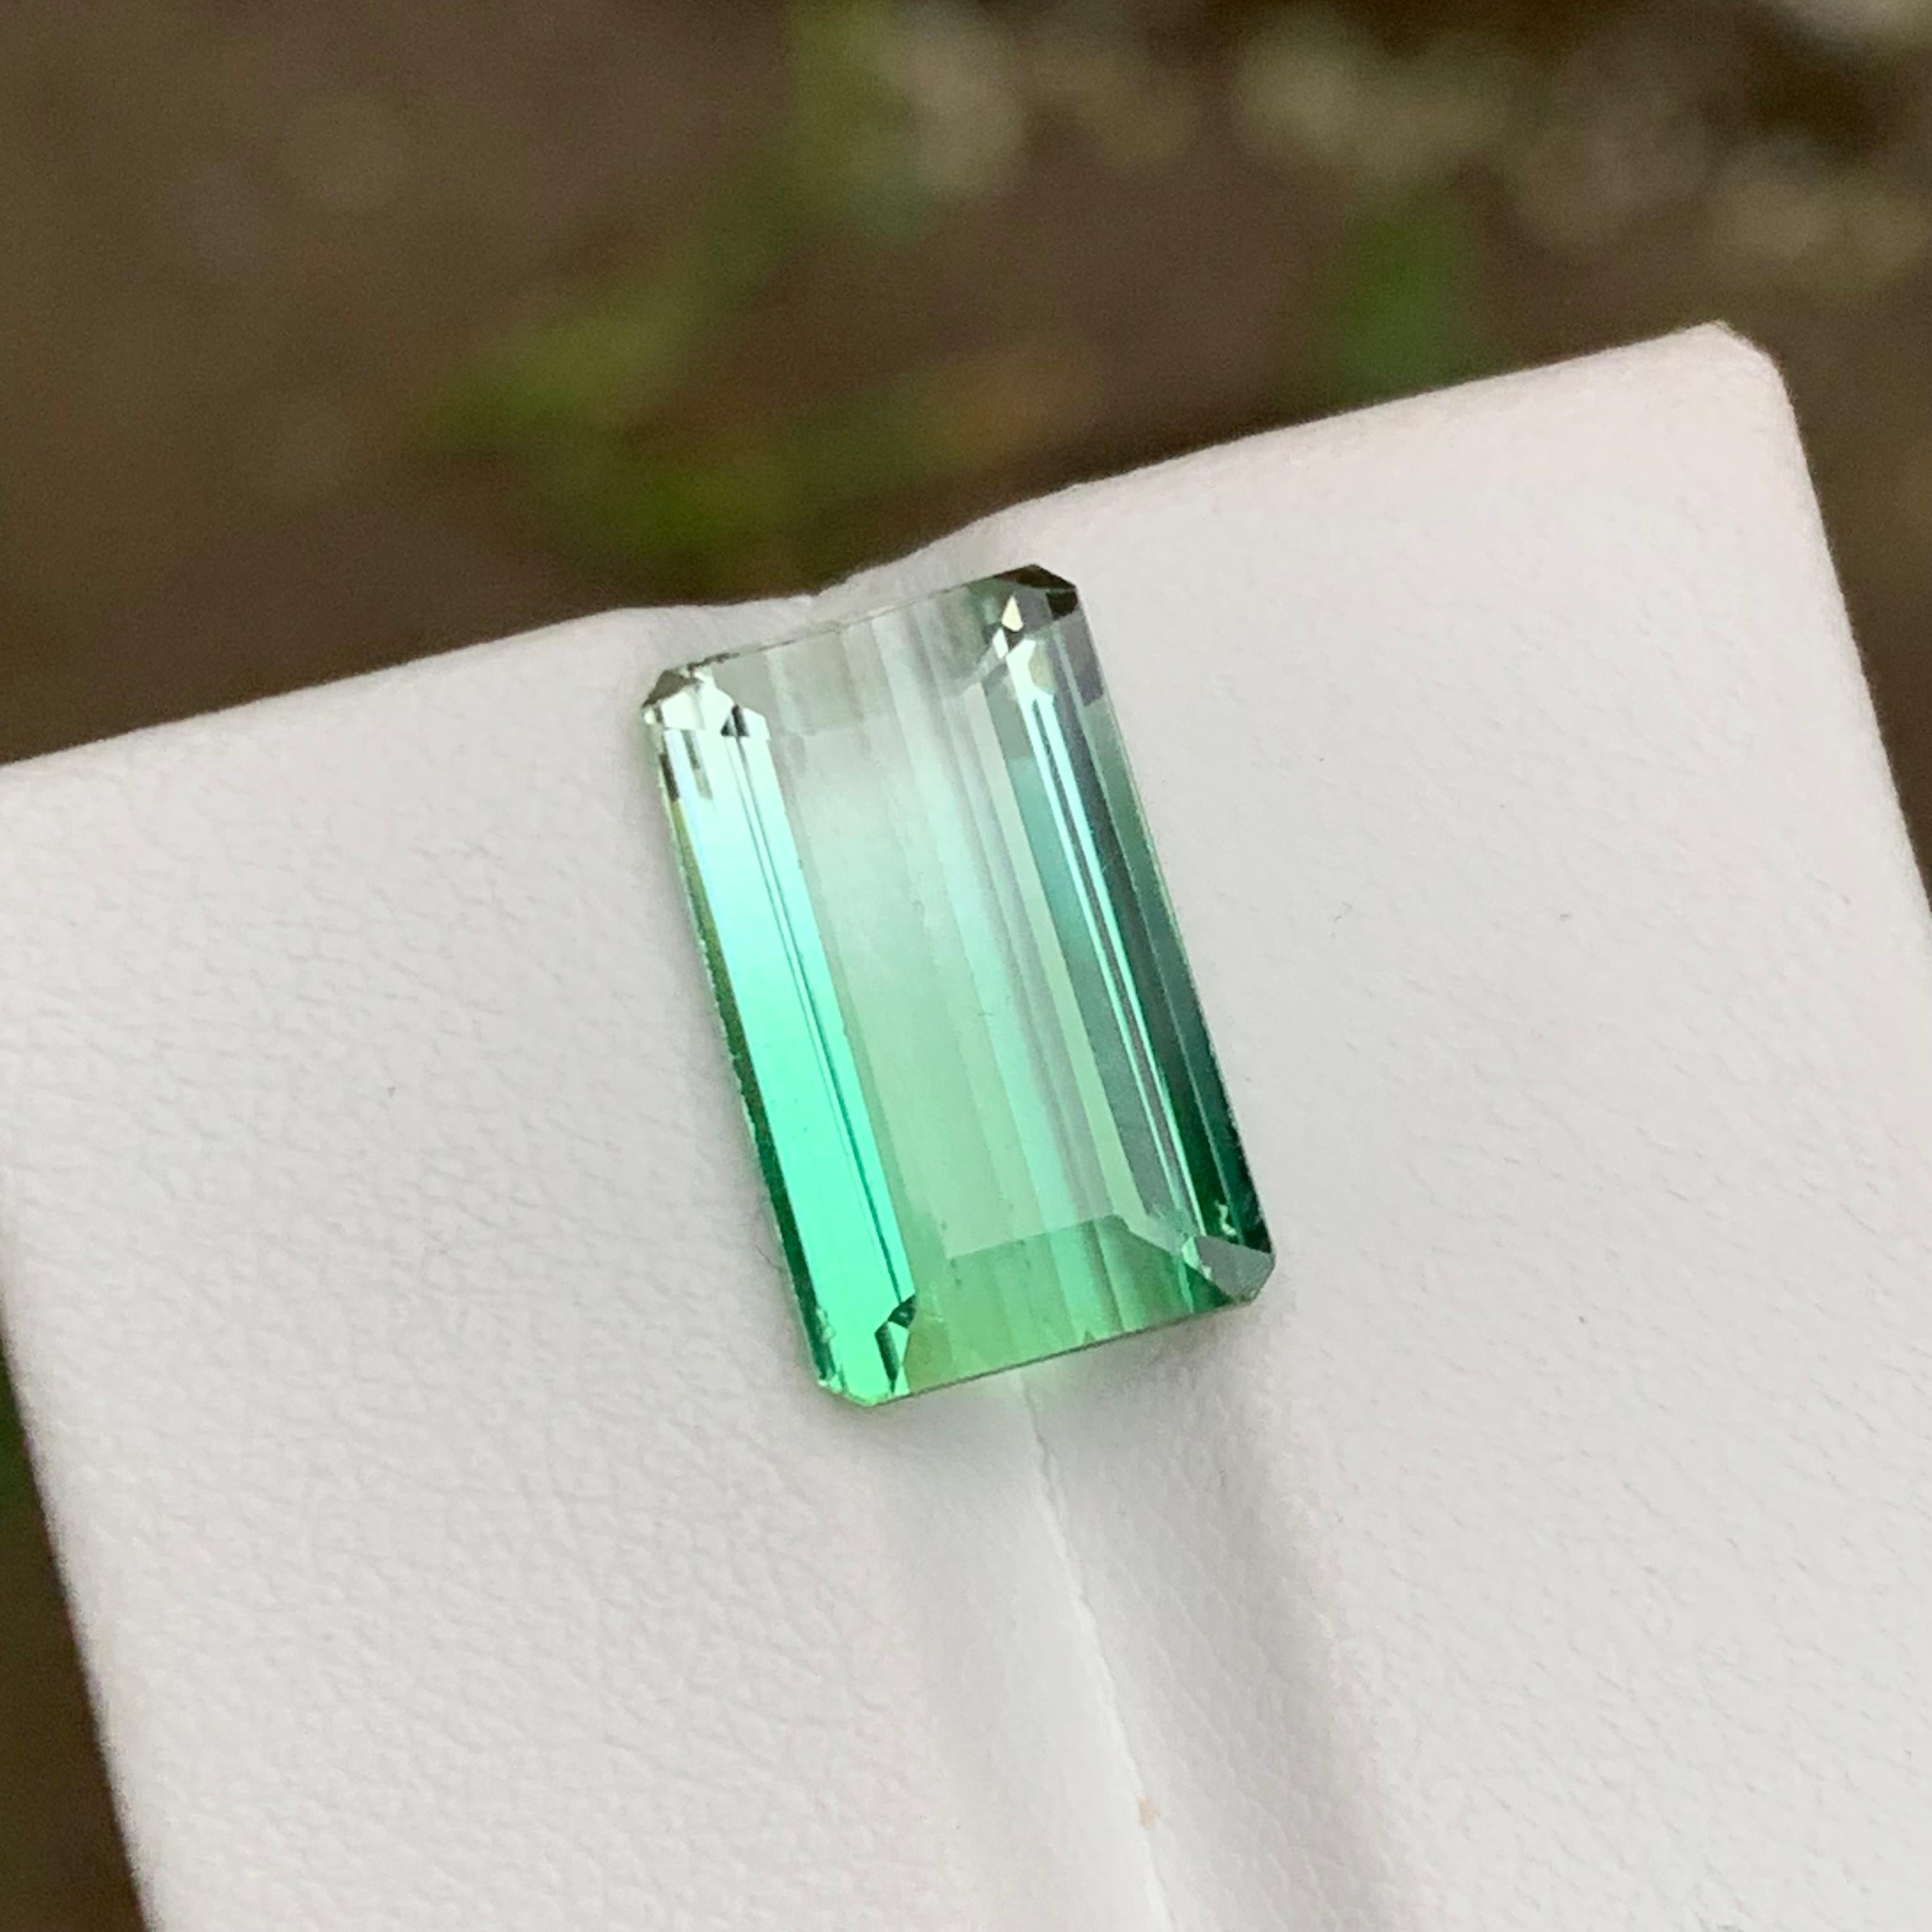 GEMSTONE TYPE: Tourmaline
PIECE(S): 1
WEIGHT: 5.65 Carats
SHAPE: Emerald 
SIZE (MM): 14.07 x 8.48 x 4.96
COLOR: Bluish Neon Green Bicolor 
CLARITY: Approximately Eye Clean
TREATMENT: None
ORIGIN: Afghanistan 🇦🇫 
CERTIFICATE: On demand
(if you